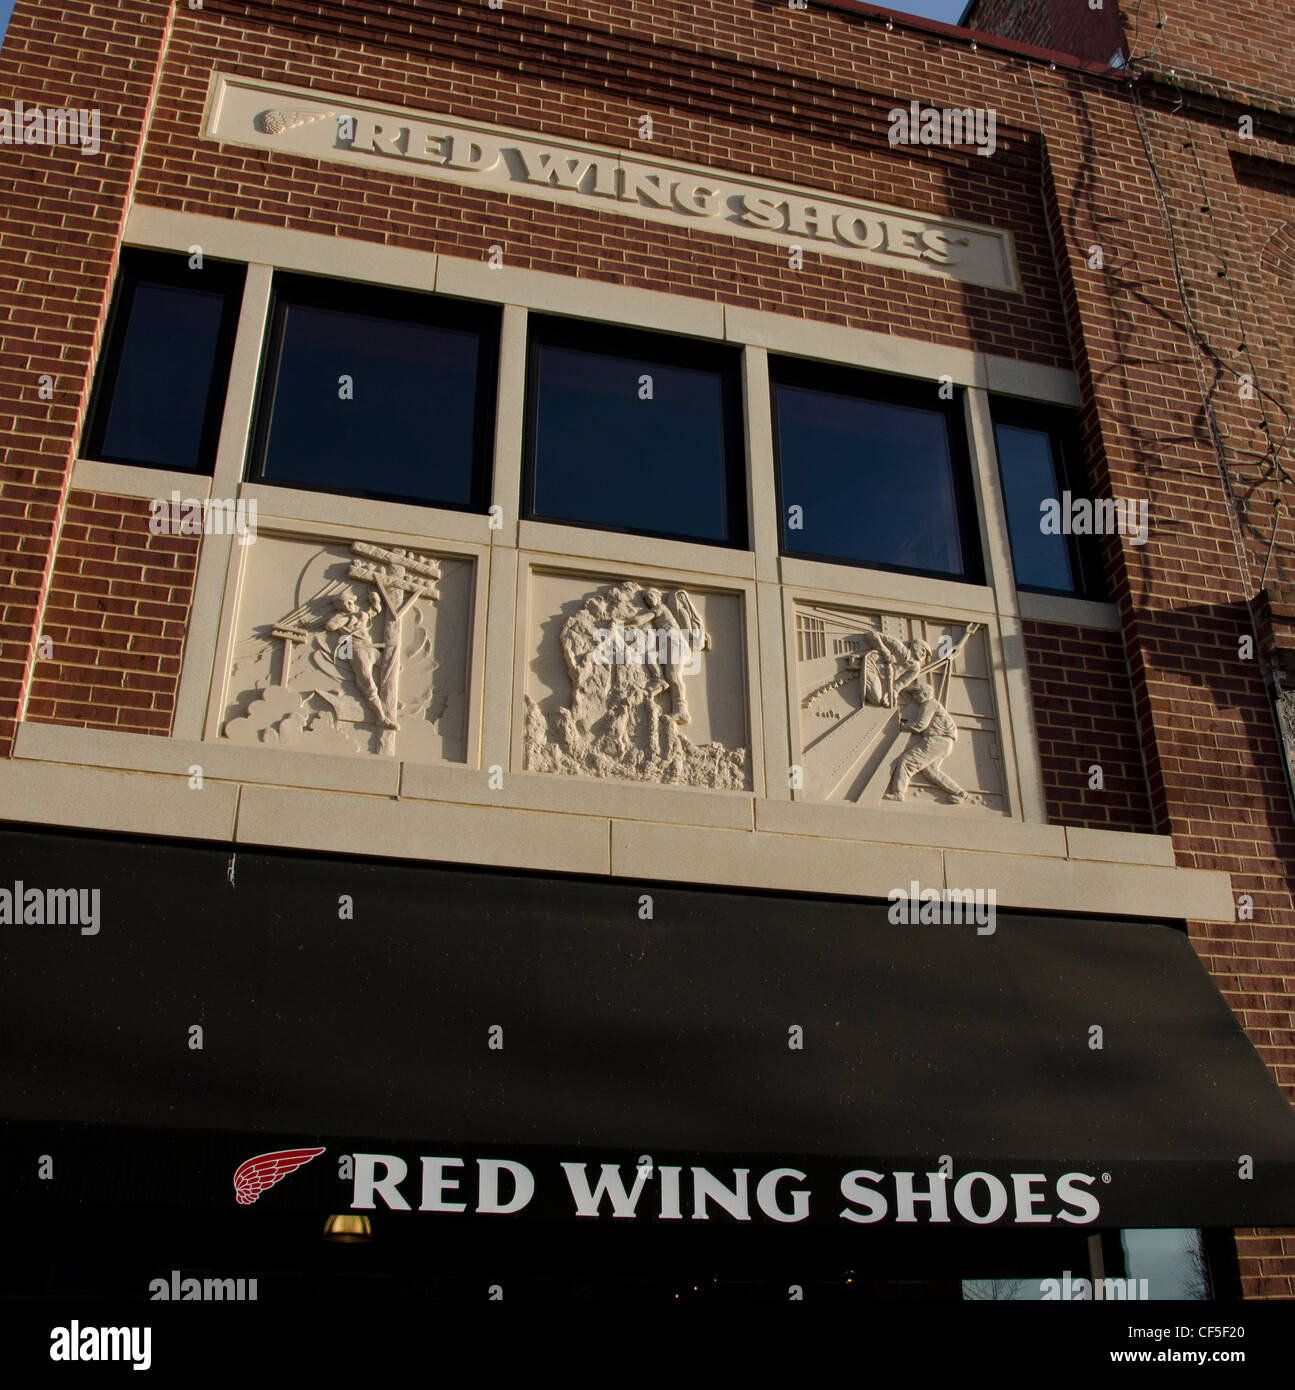 Red wing shoes hi-res images - and photography Alamy stock